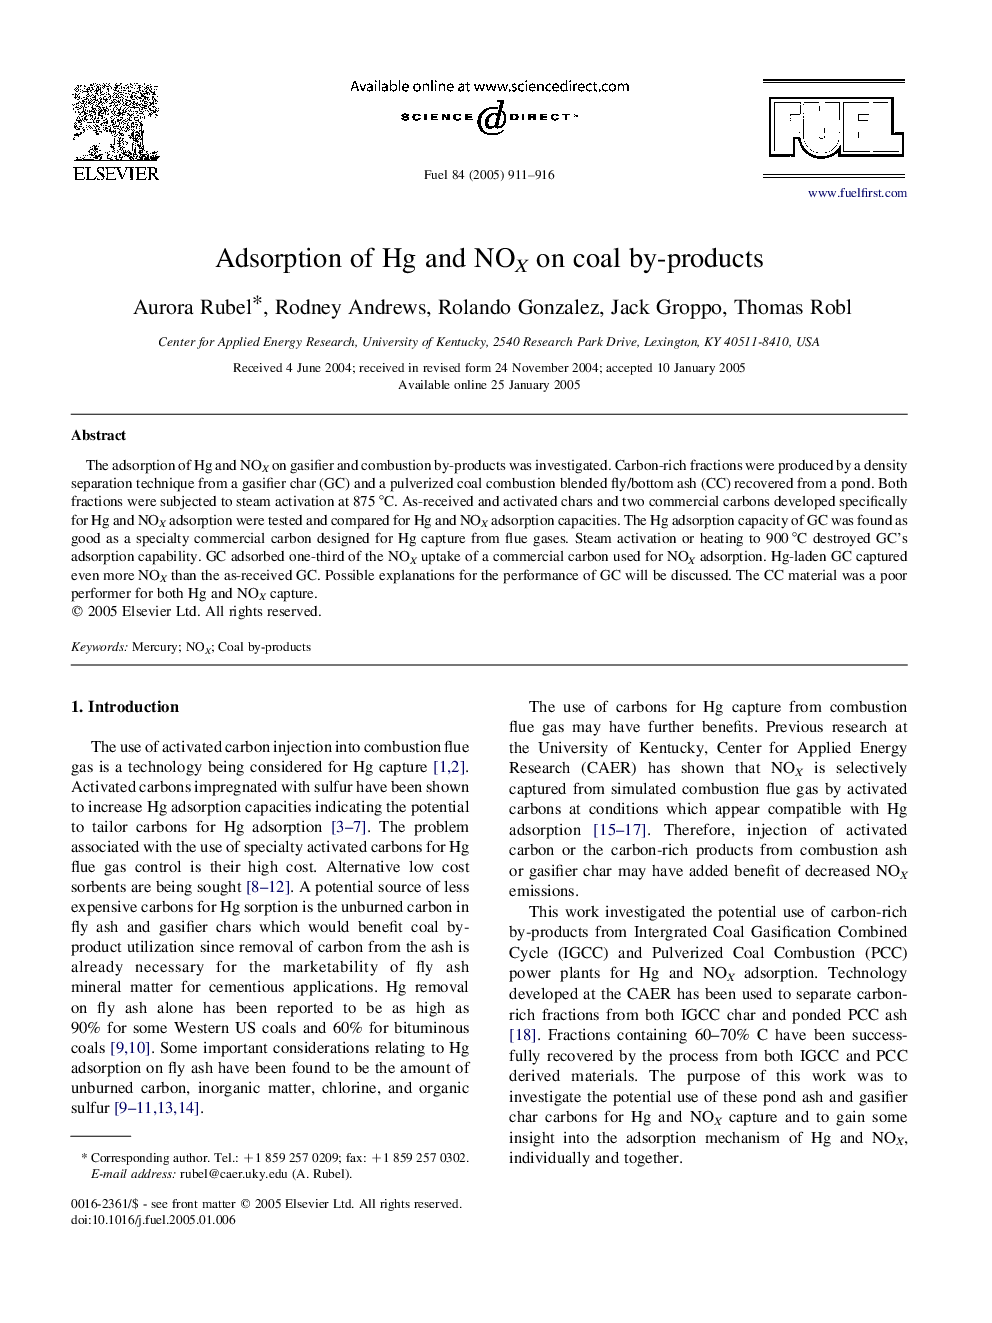 Adsorption of Hg and NOX on coal by-products